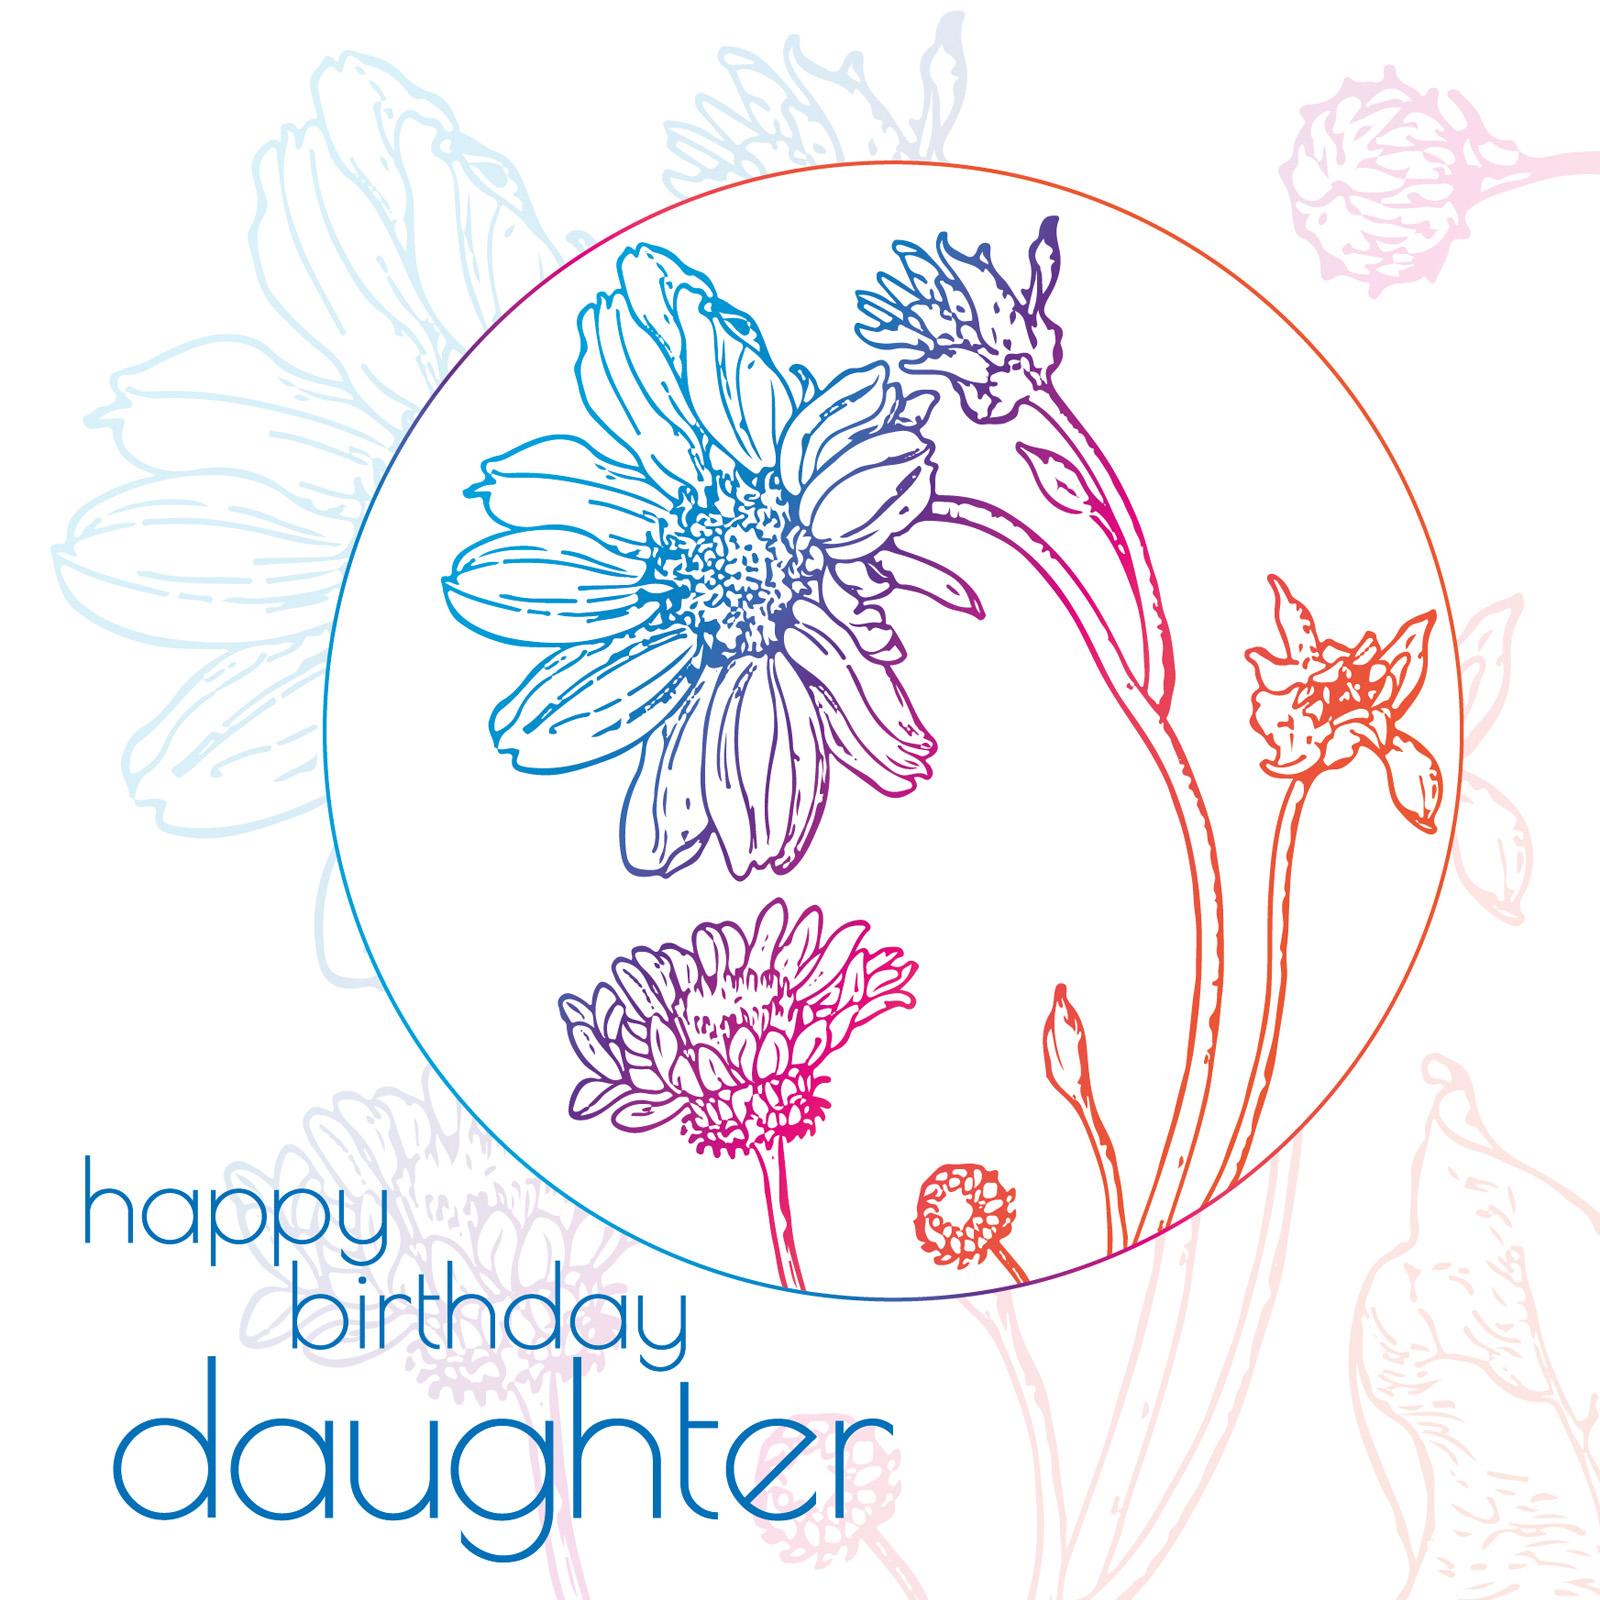 Line illustration of flowers in a pastel coloured gradient and the text happy birthday daughter